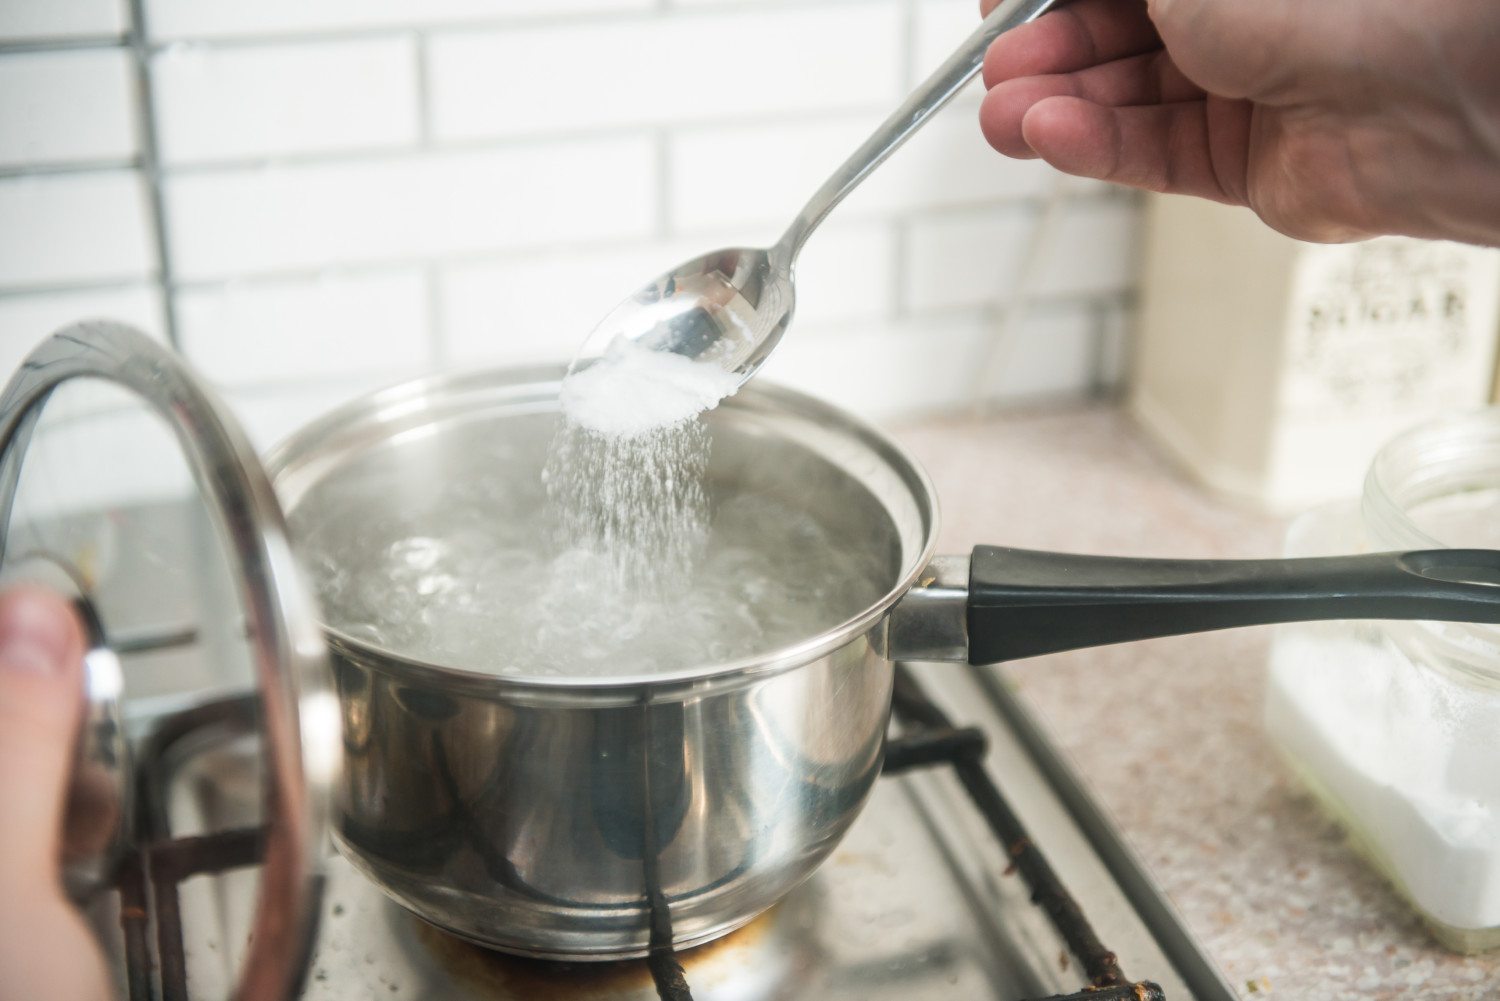 Why Do Some People Add Salt To Boiling Water?